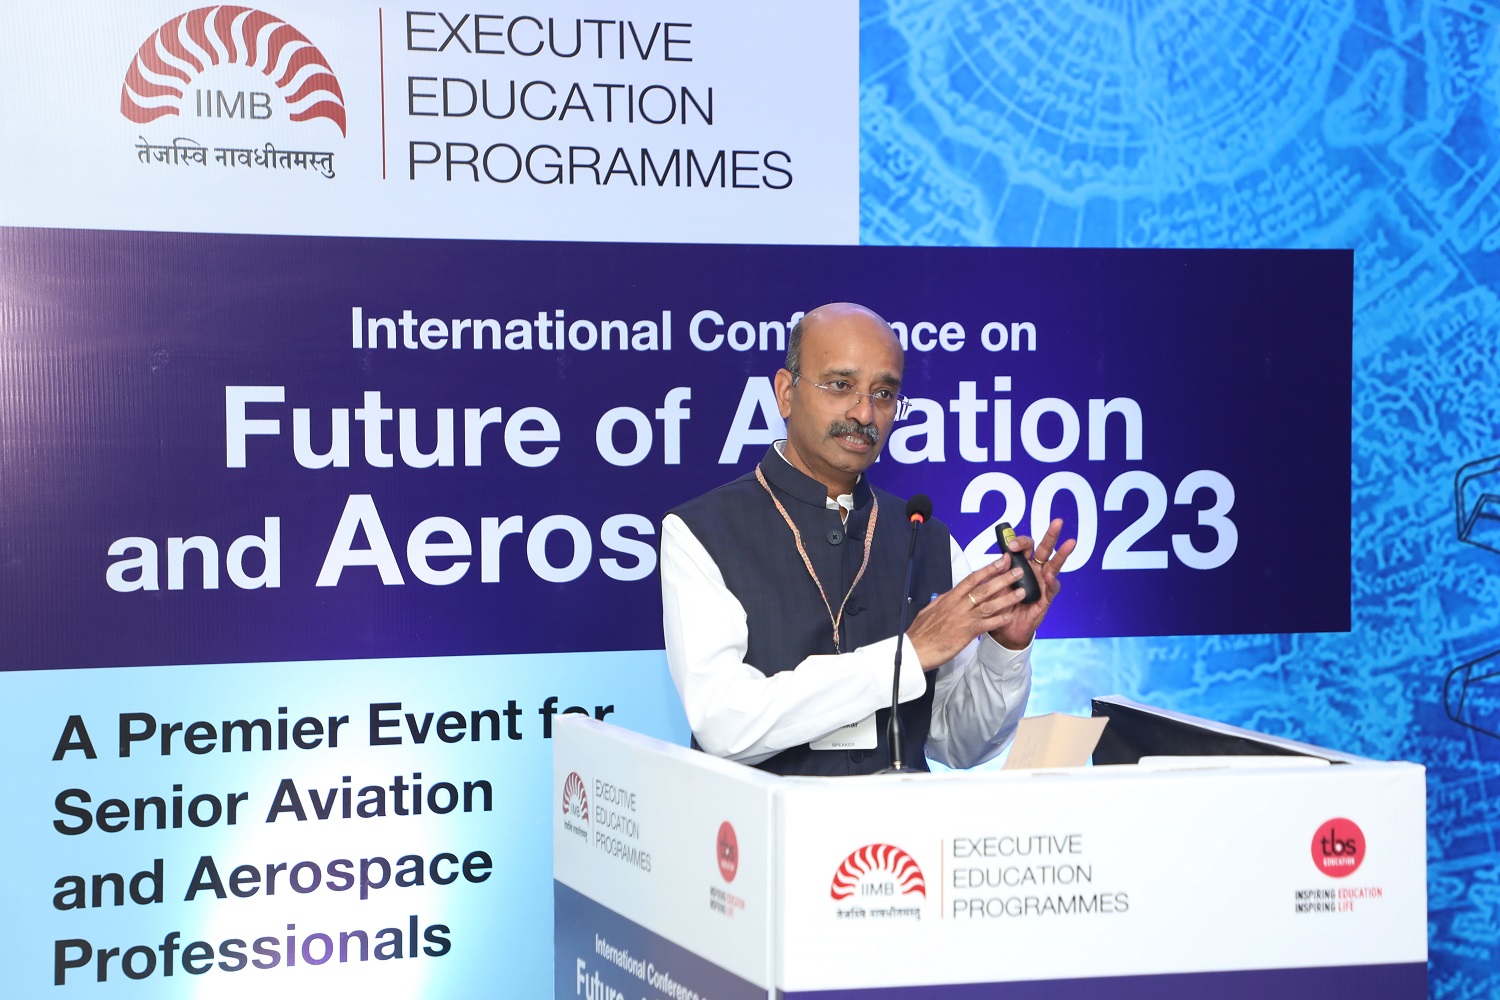 Mr. D Anand Bhaskar, MD and CEO, Air Works, spoke on 'MRO – The Opportunities and Challenges' at FOAA 2023.